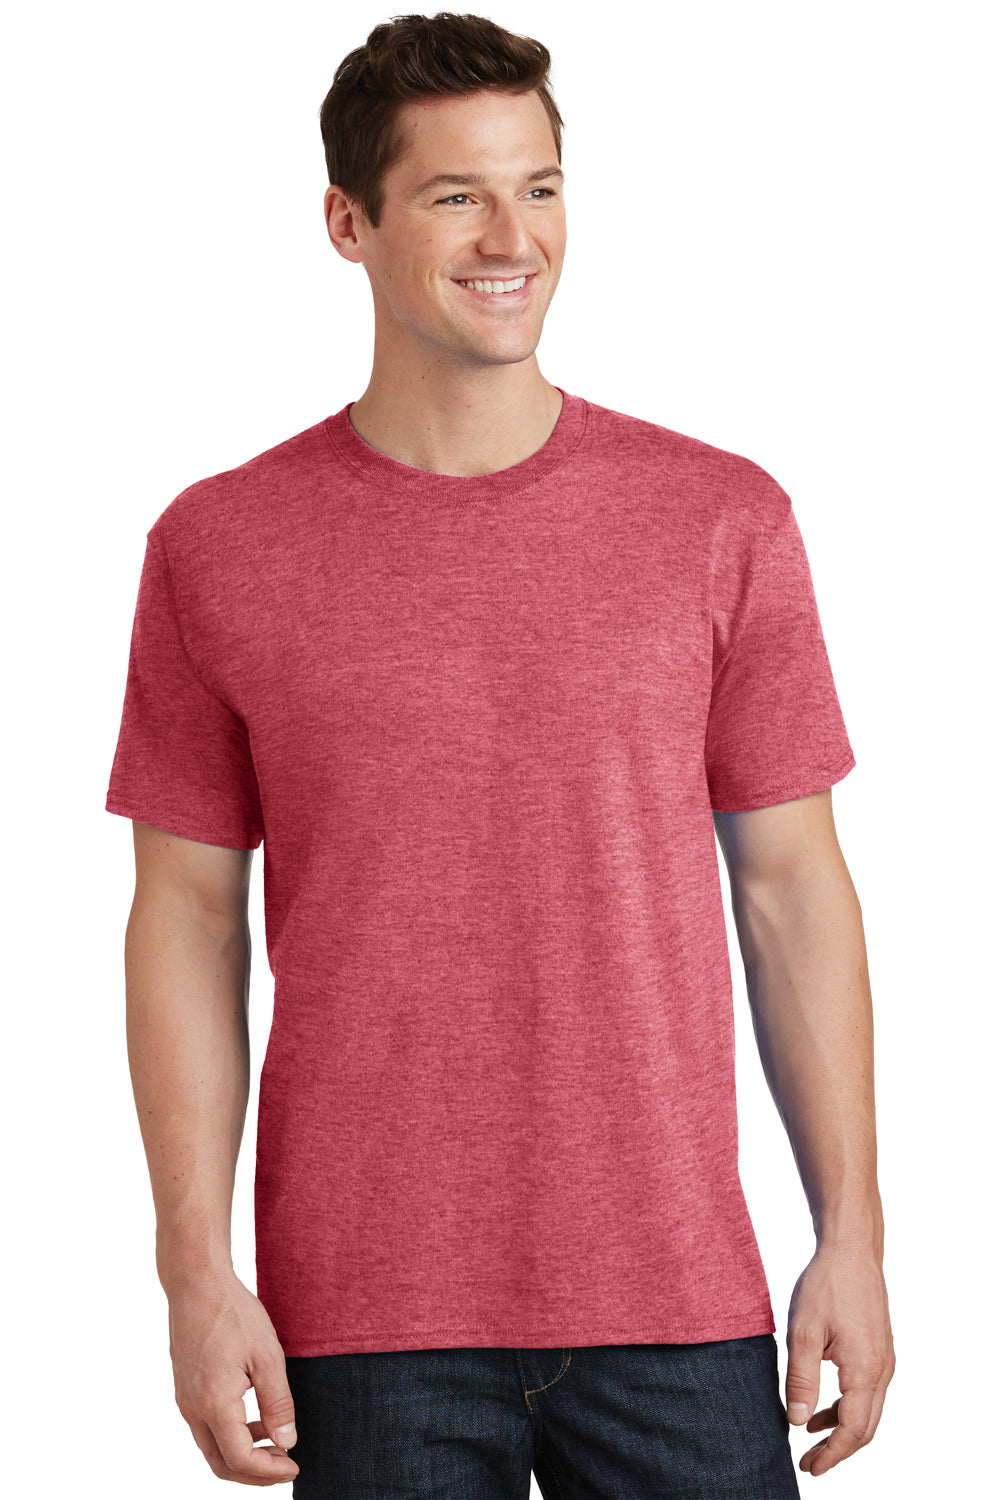 Port & Company PC54 Mens Core Short Sleeve Crewneck T-Shirt Heather Red Front